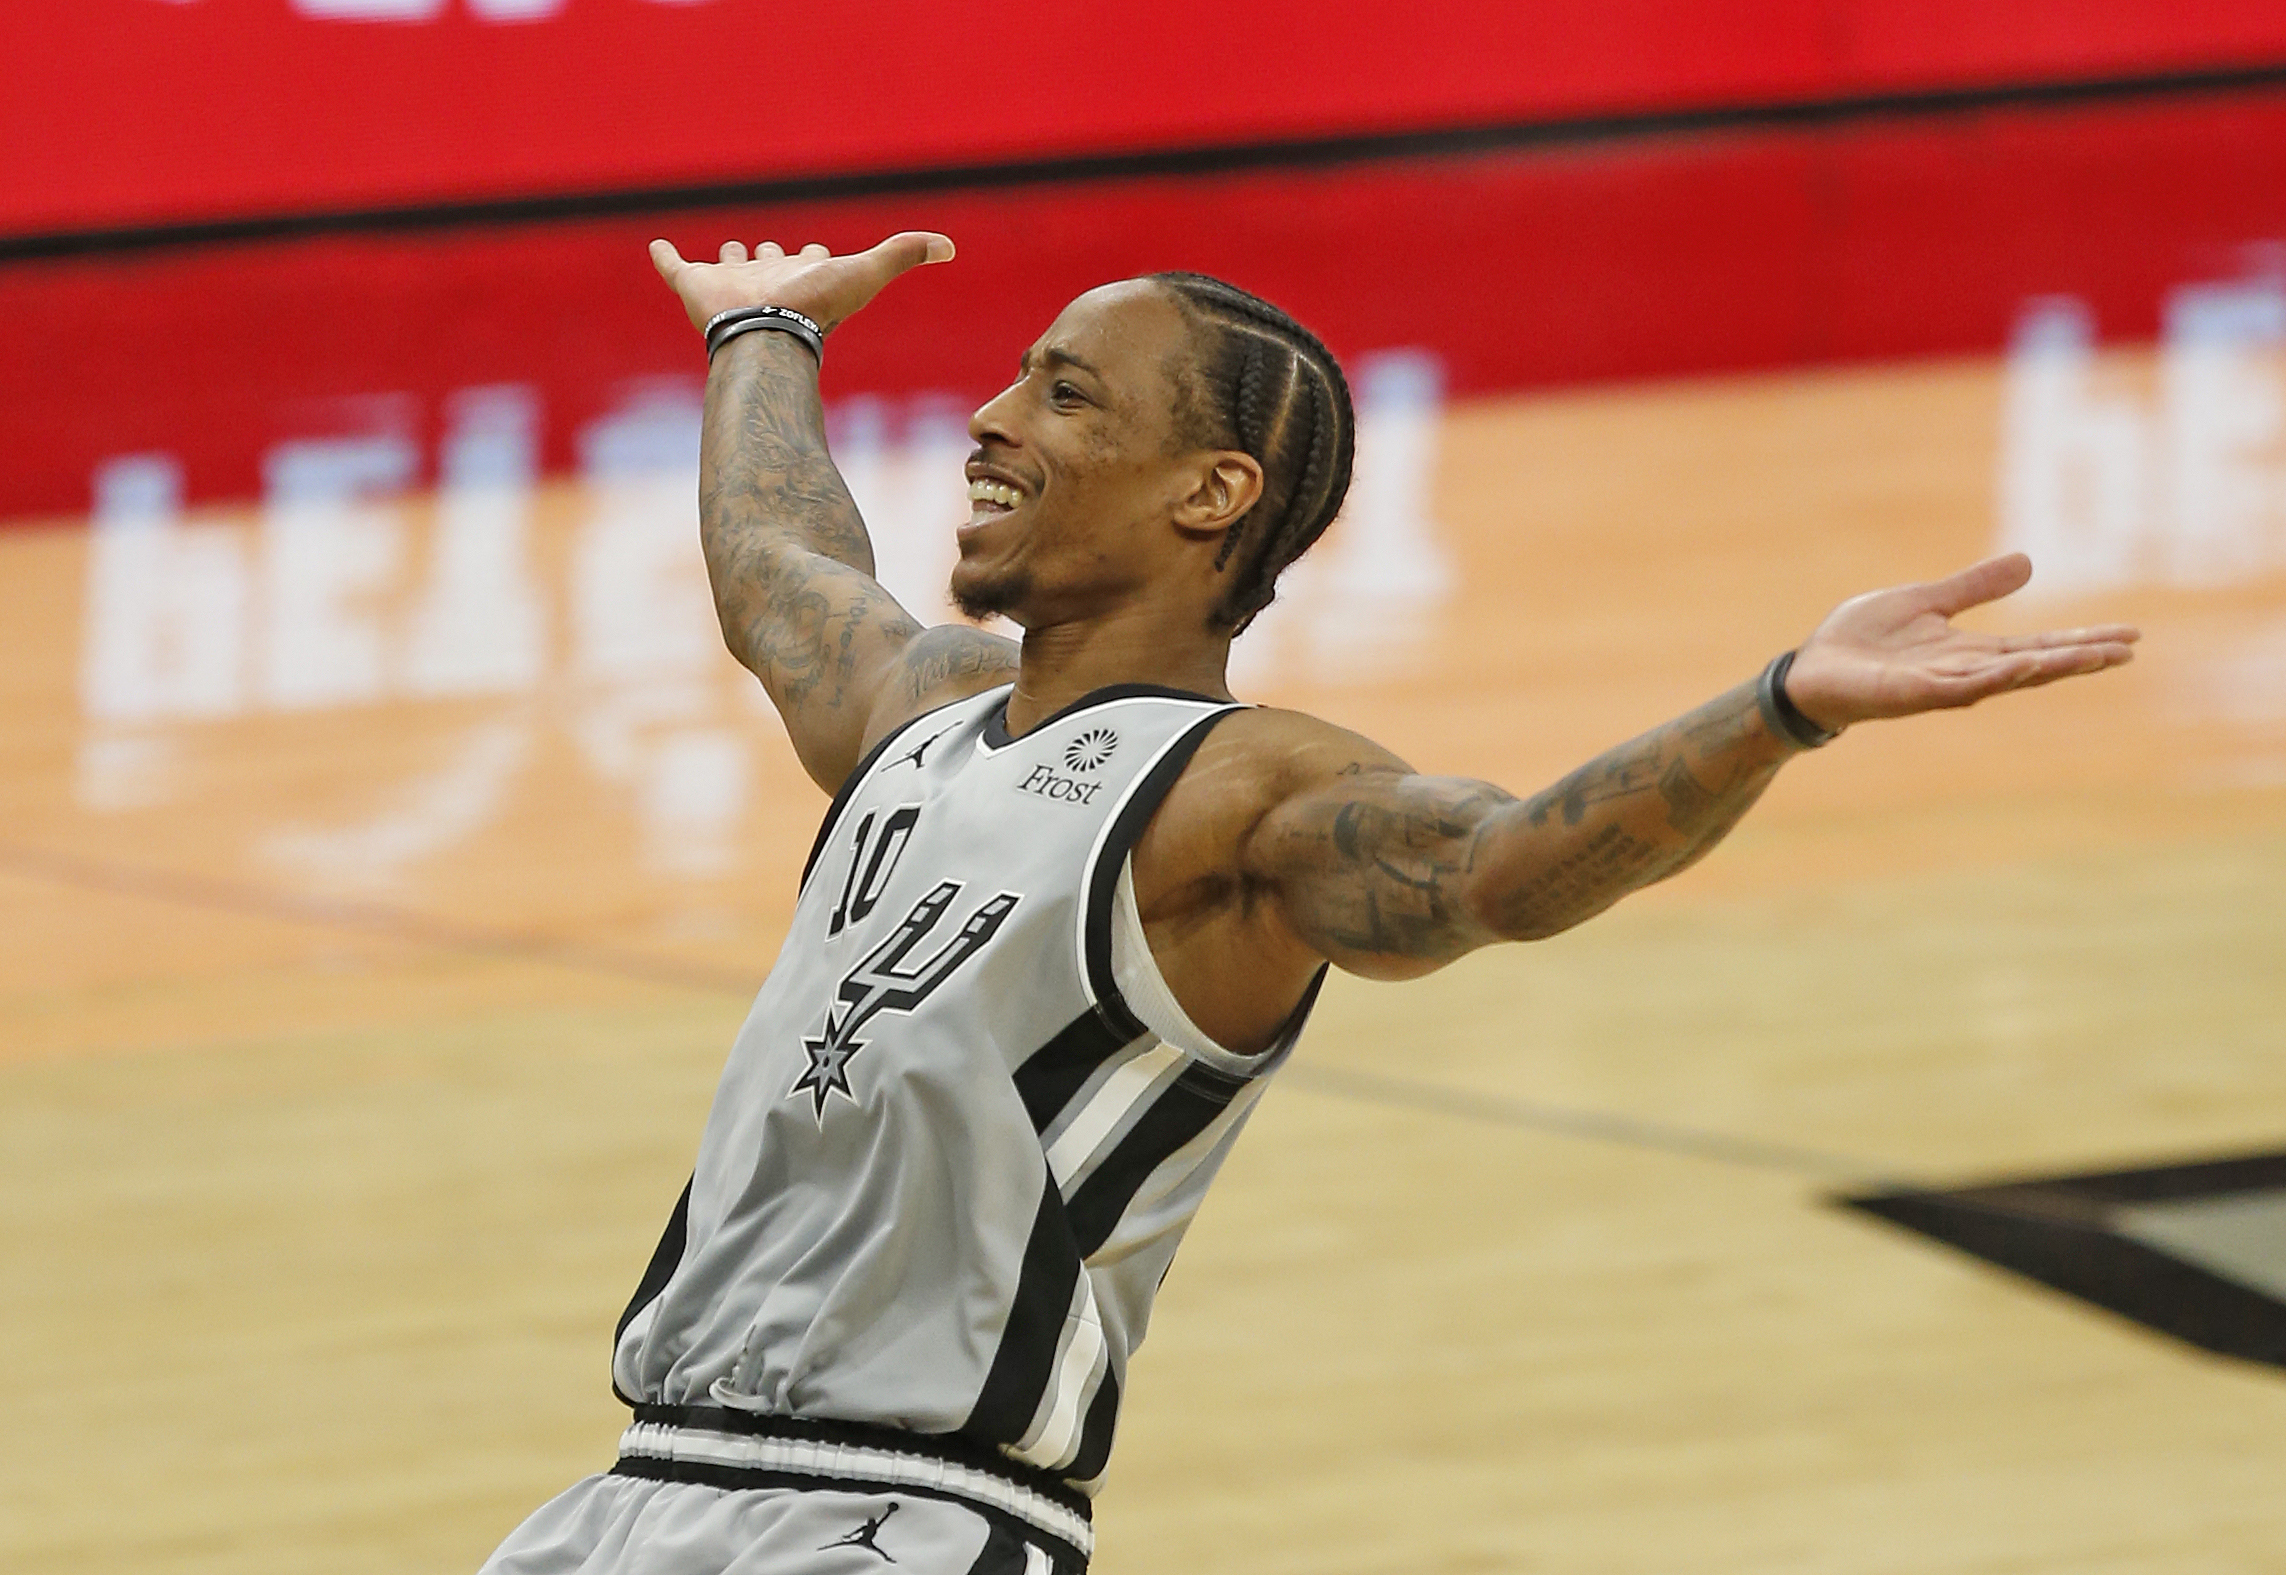 New Chicago Bulls forward DeMar DeRozan reacts during a game in May